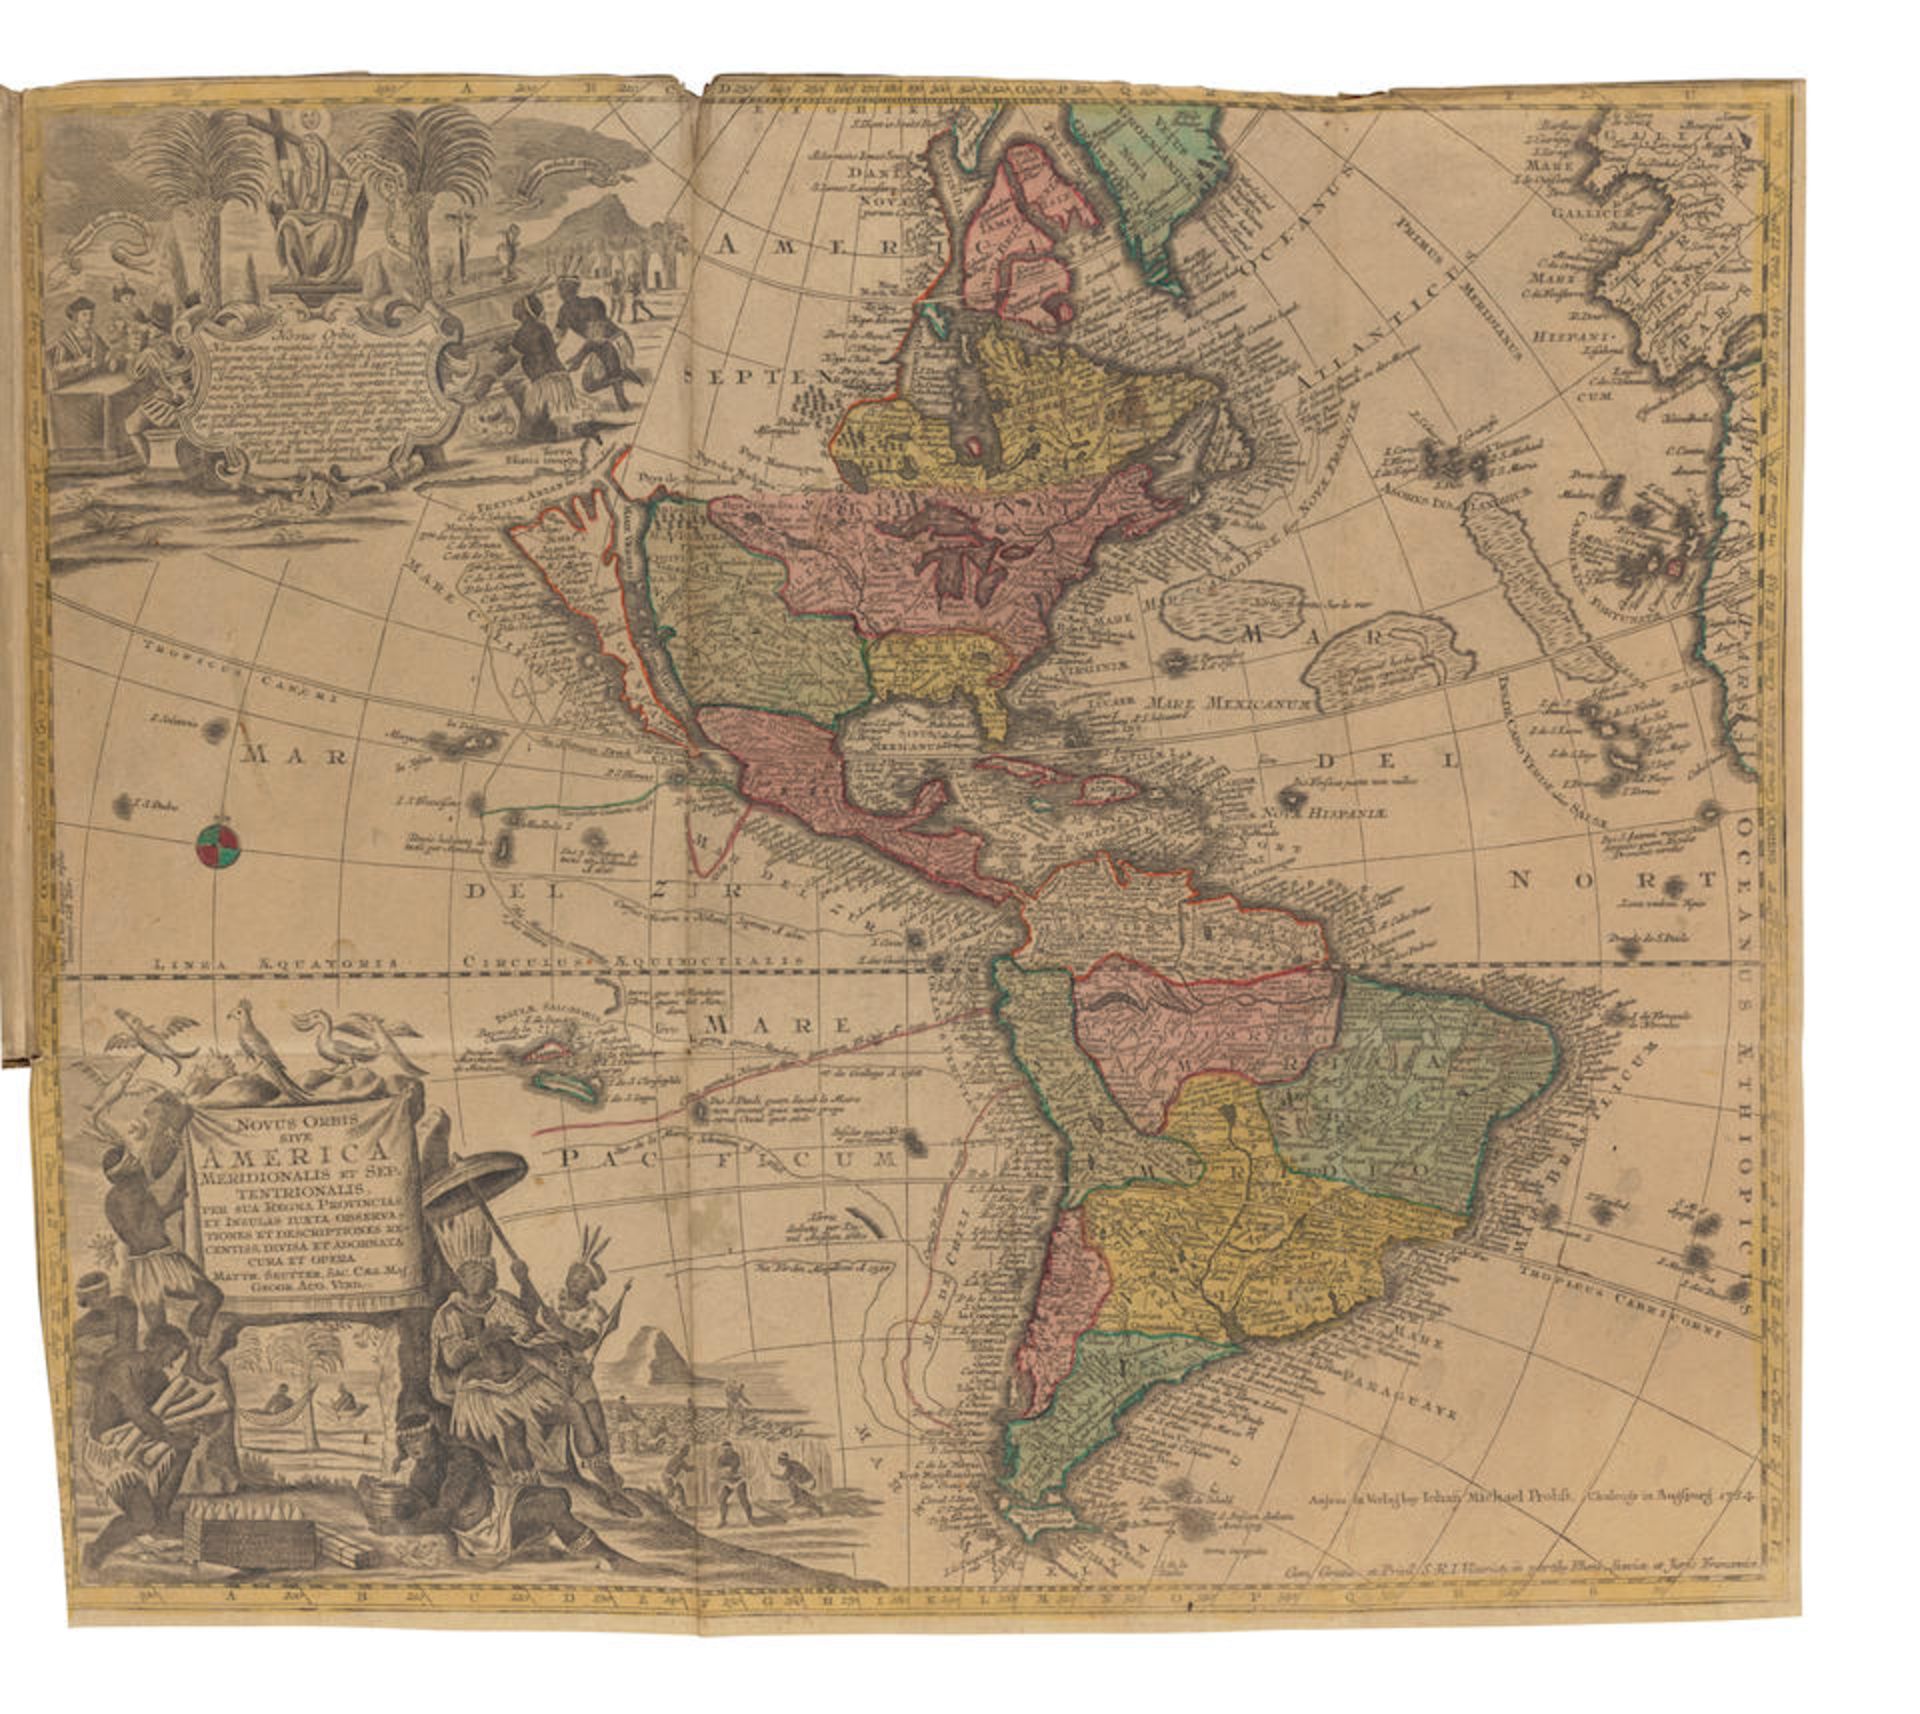 ATLAS OF COLLECTED MAPS. Composite Atlas containing 22 hand-colored engraved maps including a wo...